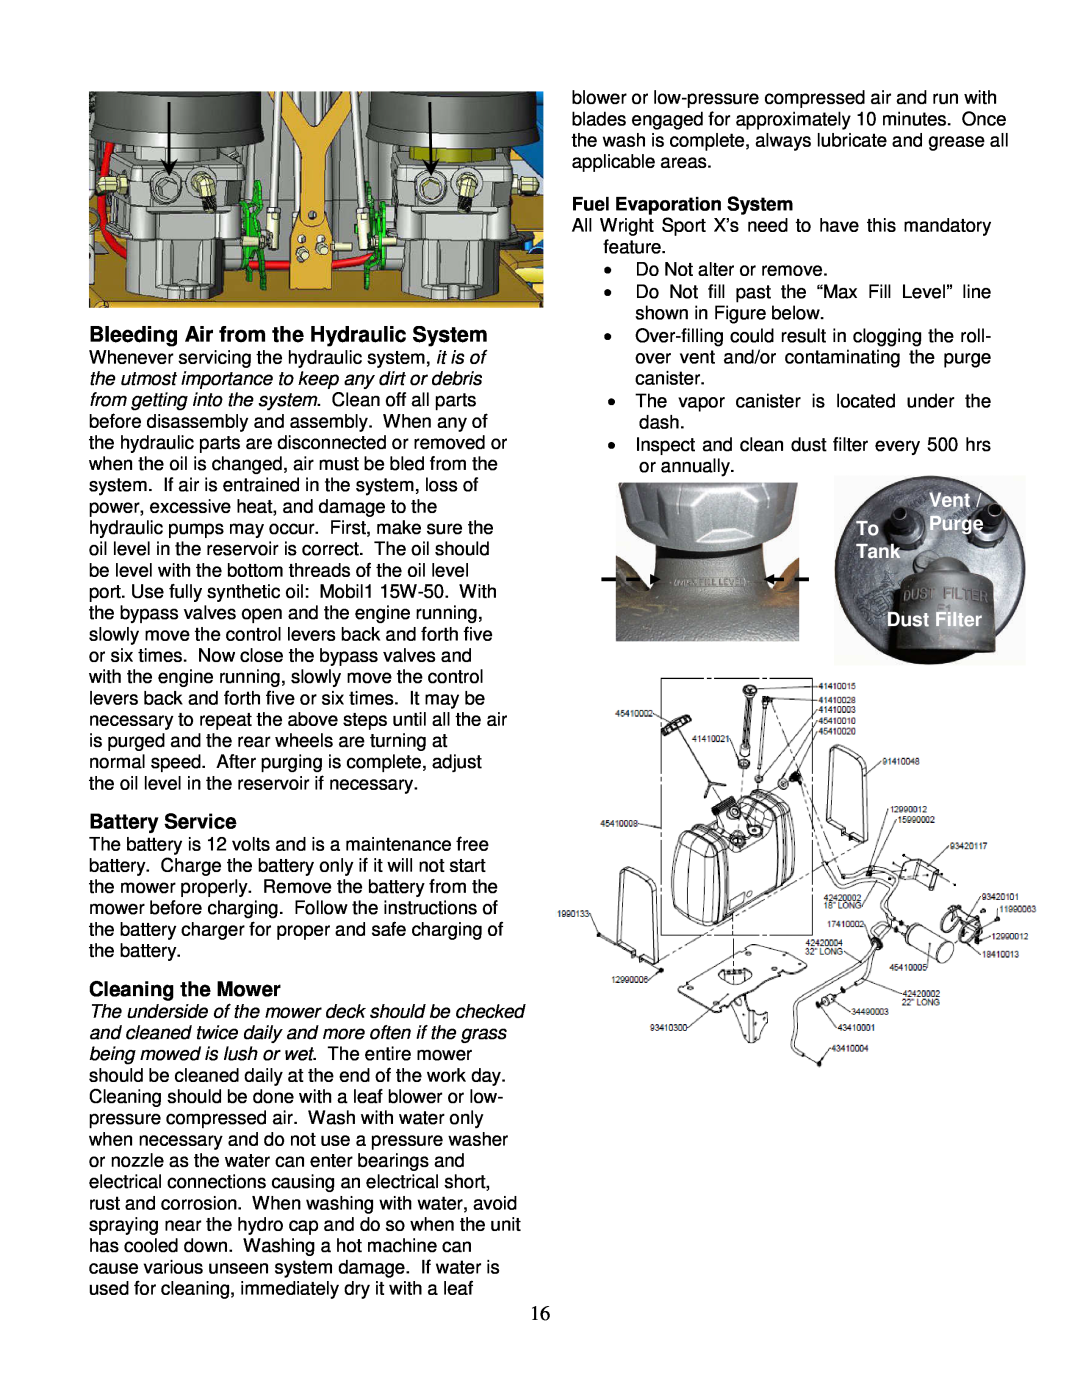 Wright Manufacturing 14SH654 owner manual Bleeding Air from the Hydraulic System, Battery Service, Cleaning the Mower 